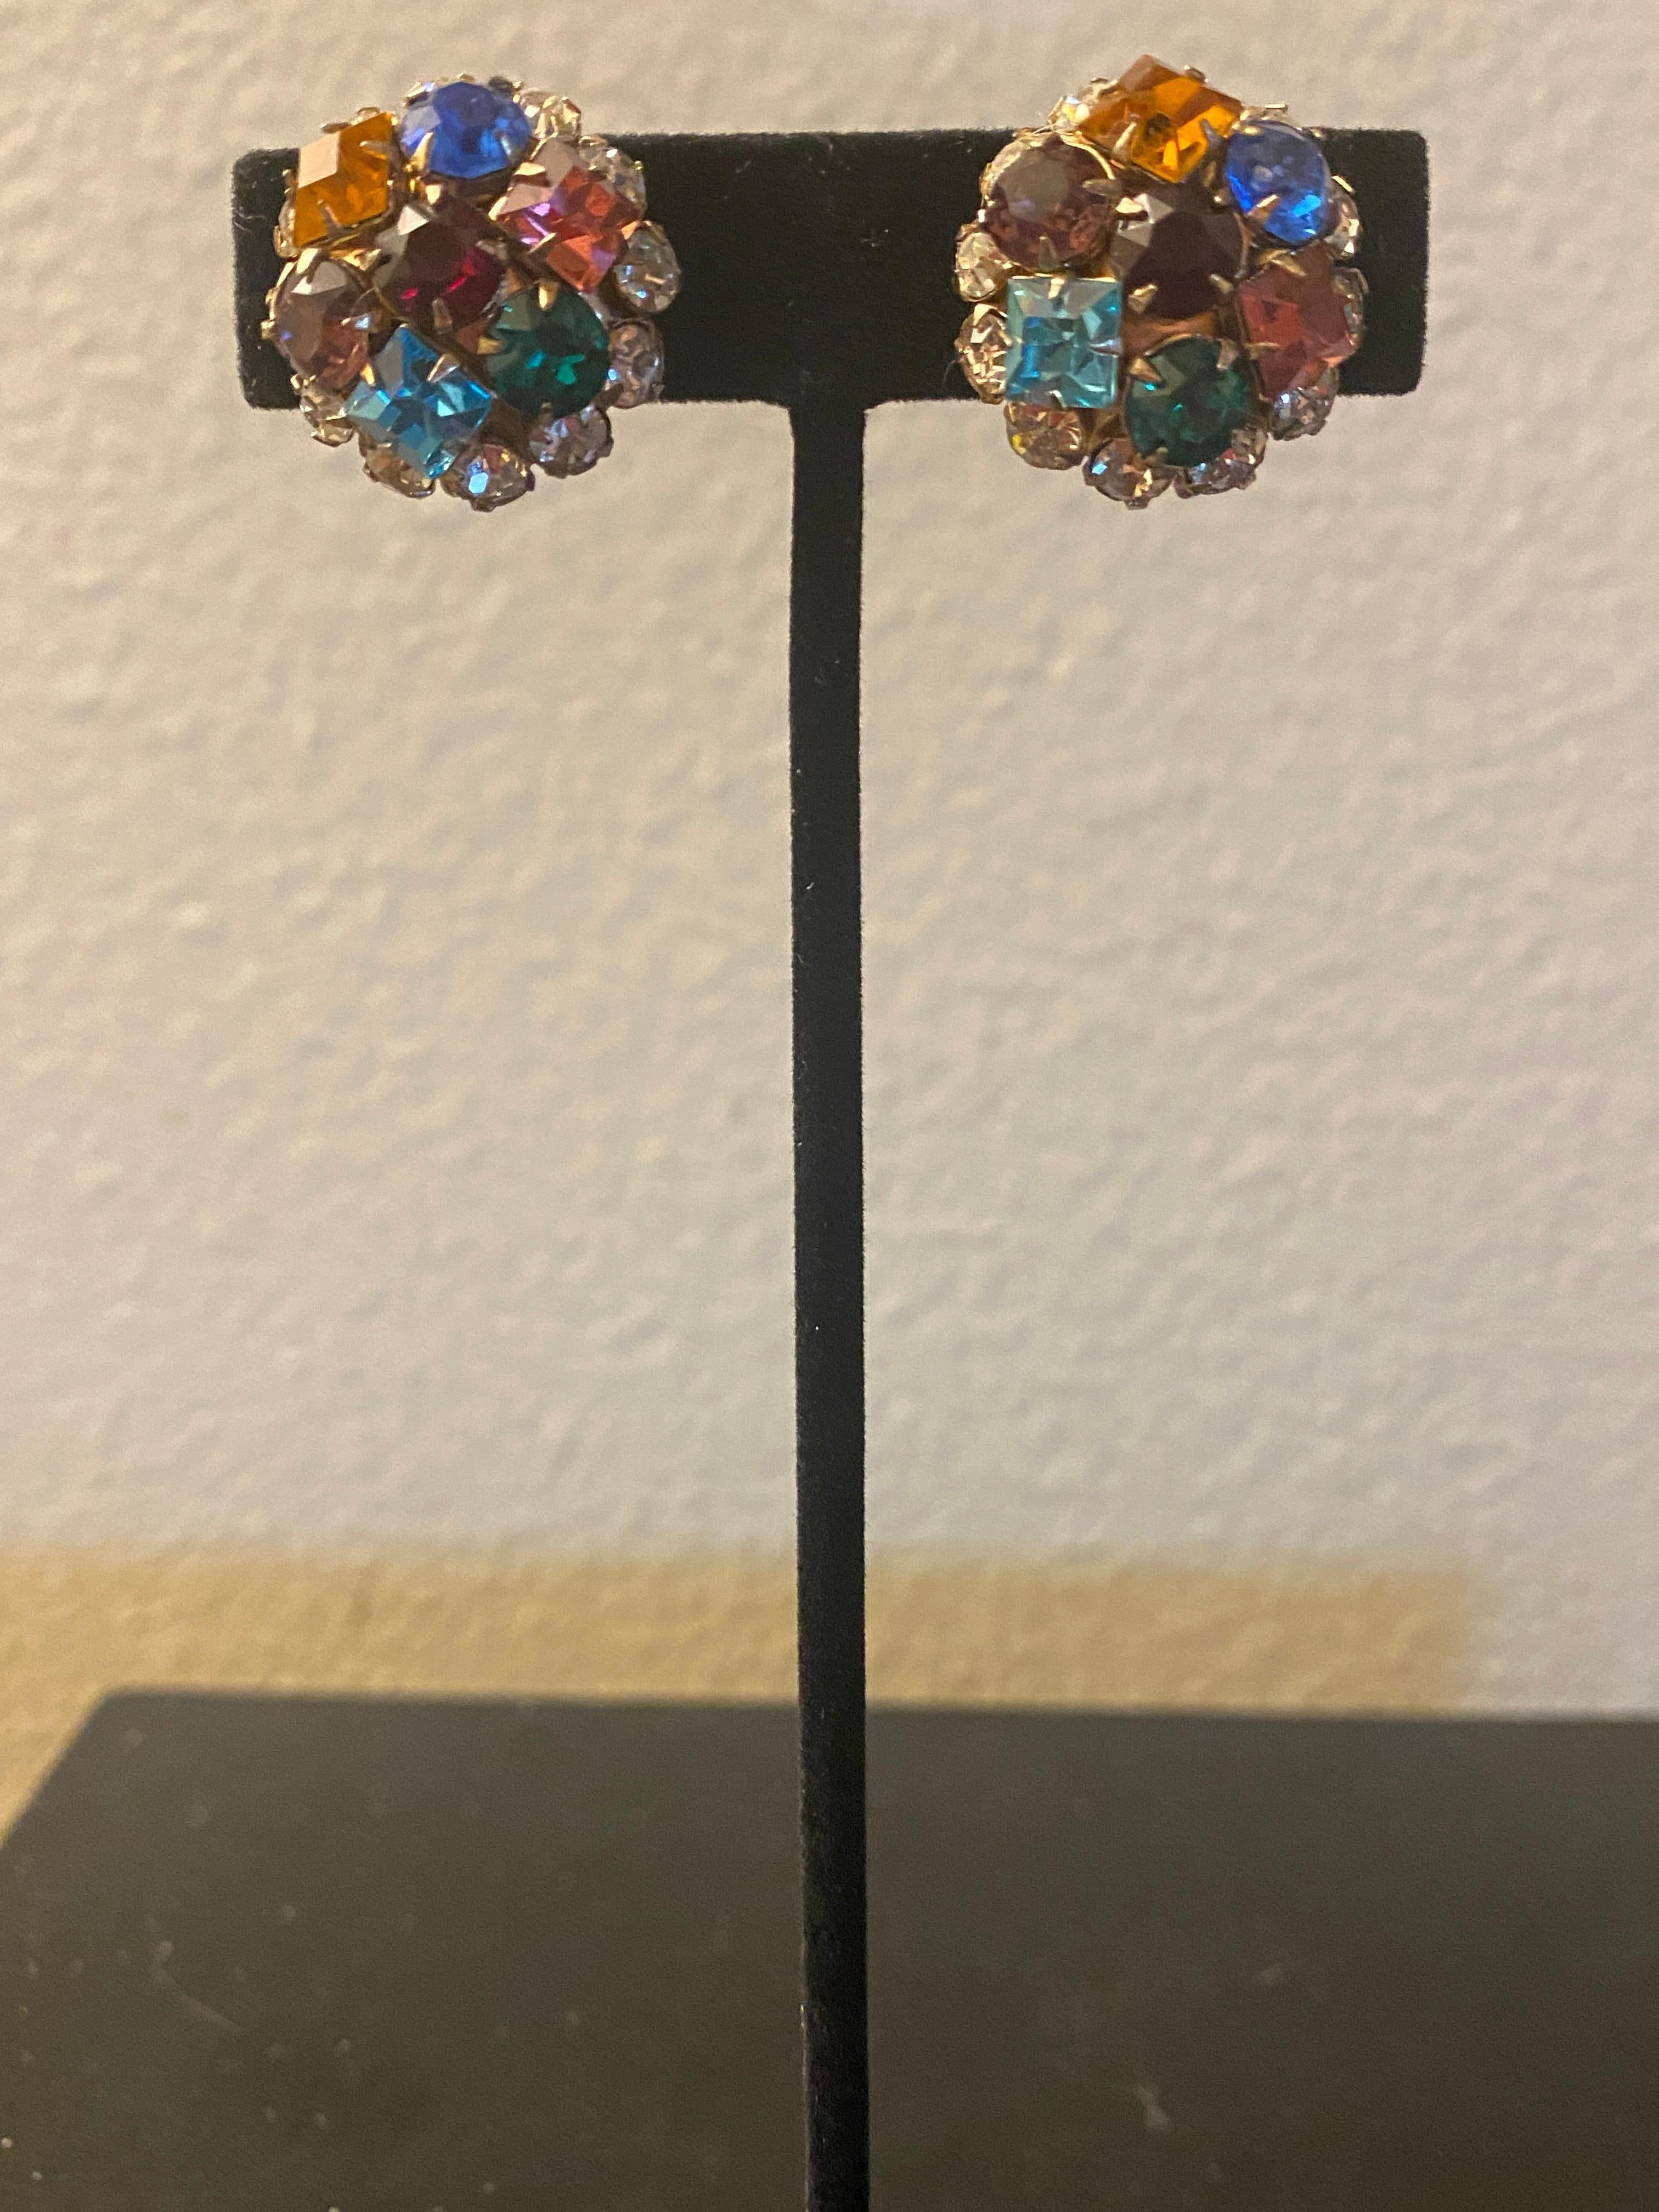 We have collected vintage costume jewelry earrings since the 80’s. One by one we have curated a lovely collection of unbranded and designer earrings. Made from the 1950s to 2000. Each one unique and worthy of a modern Fashionista’s collection. We